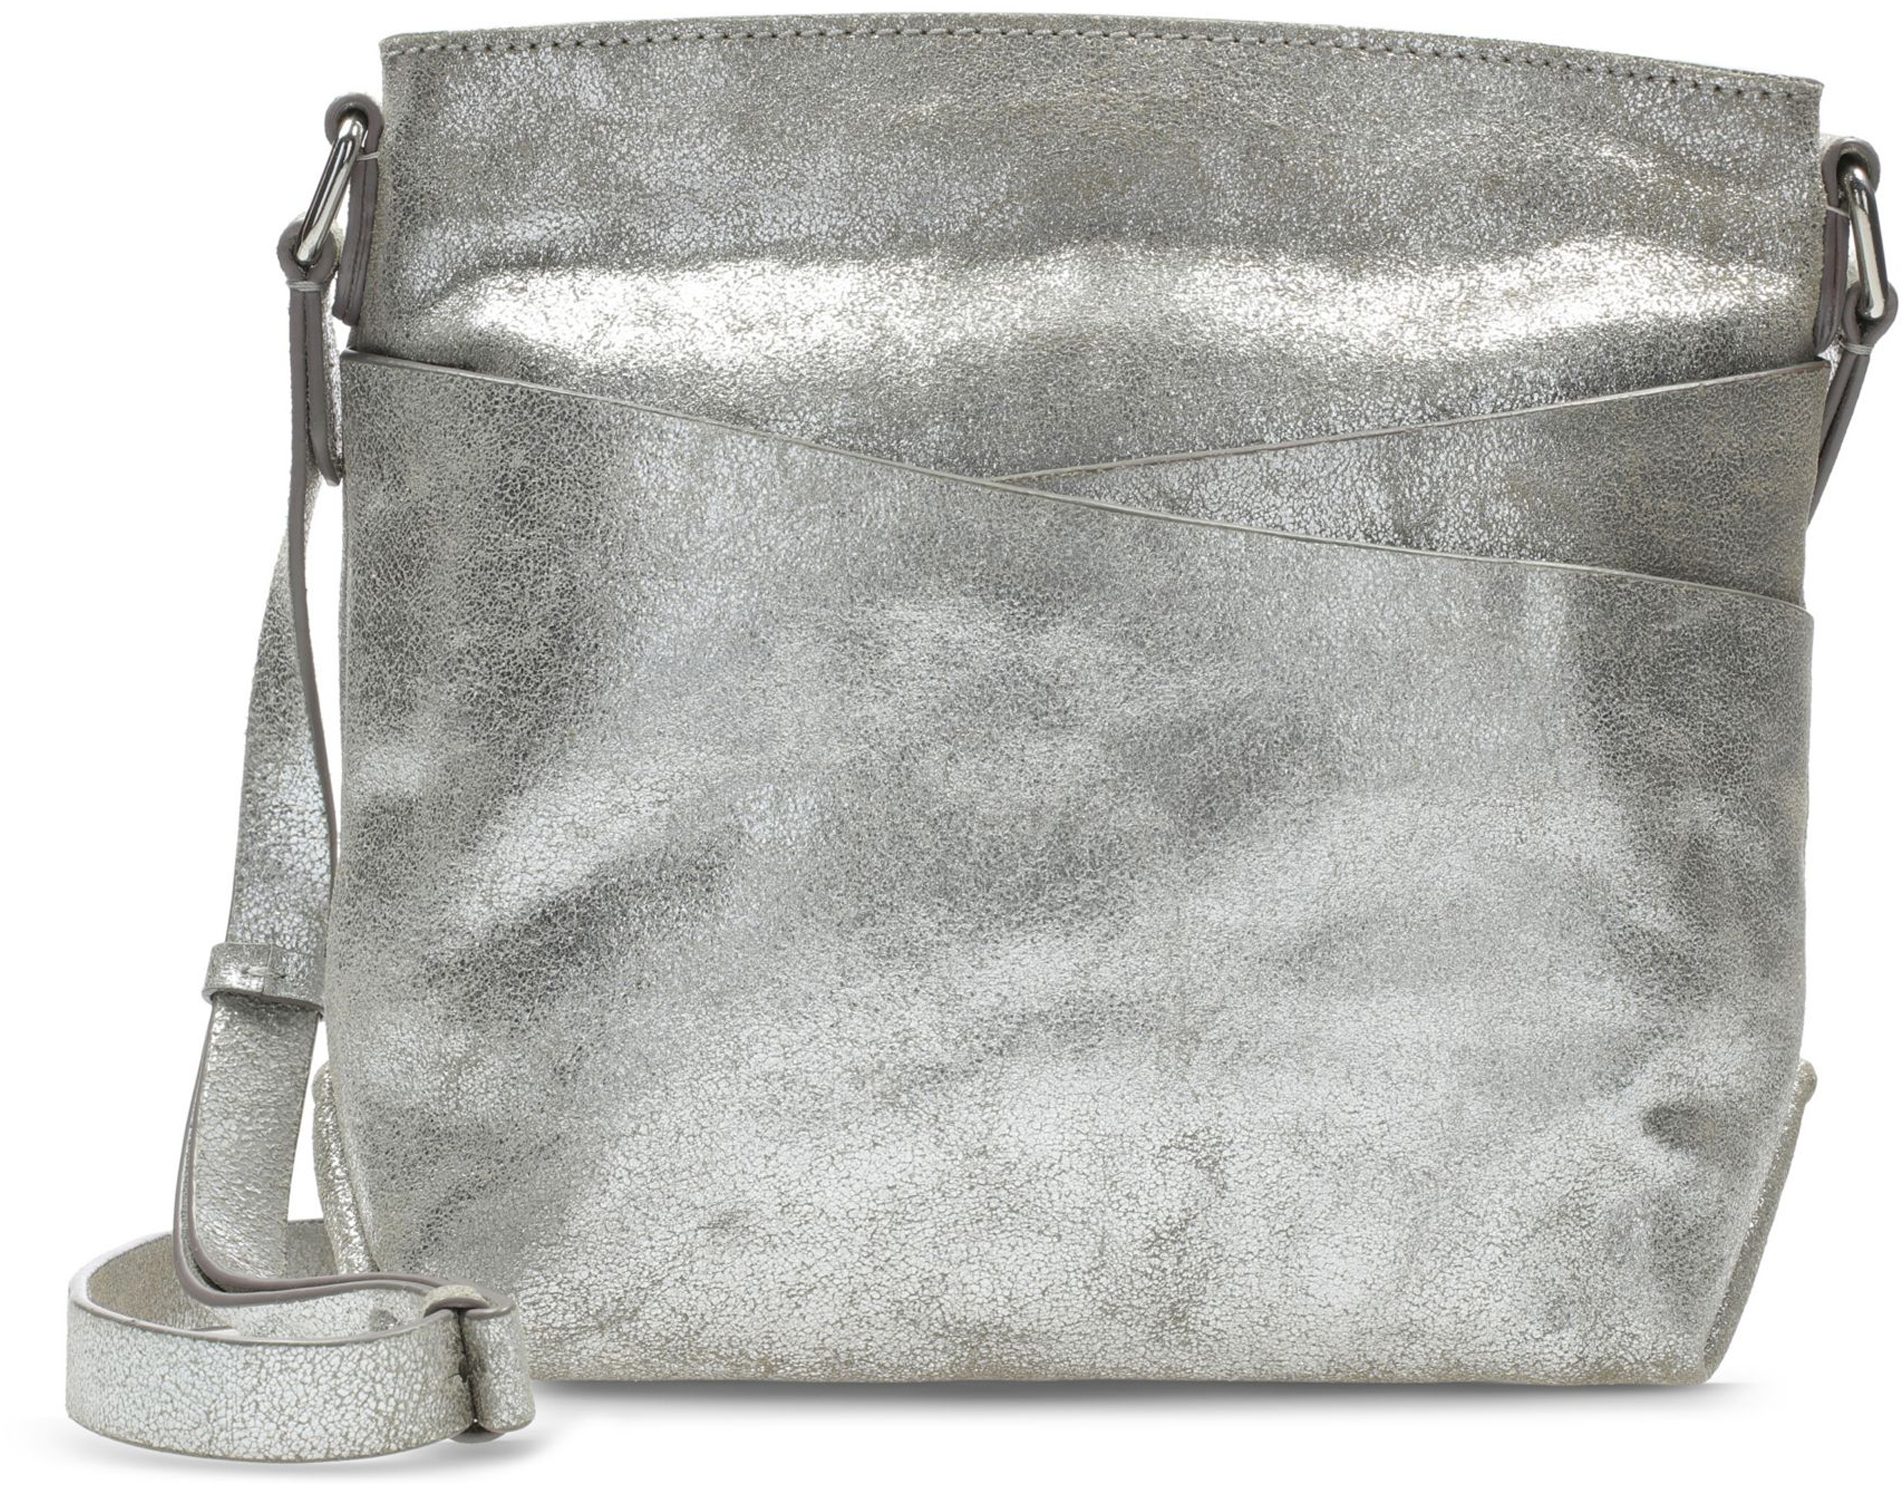 Clarks Topsham Charm Silver Leather 26141360 - Cross Body Bags ...